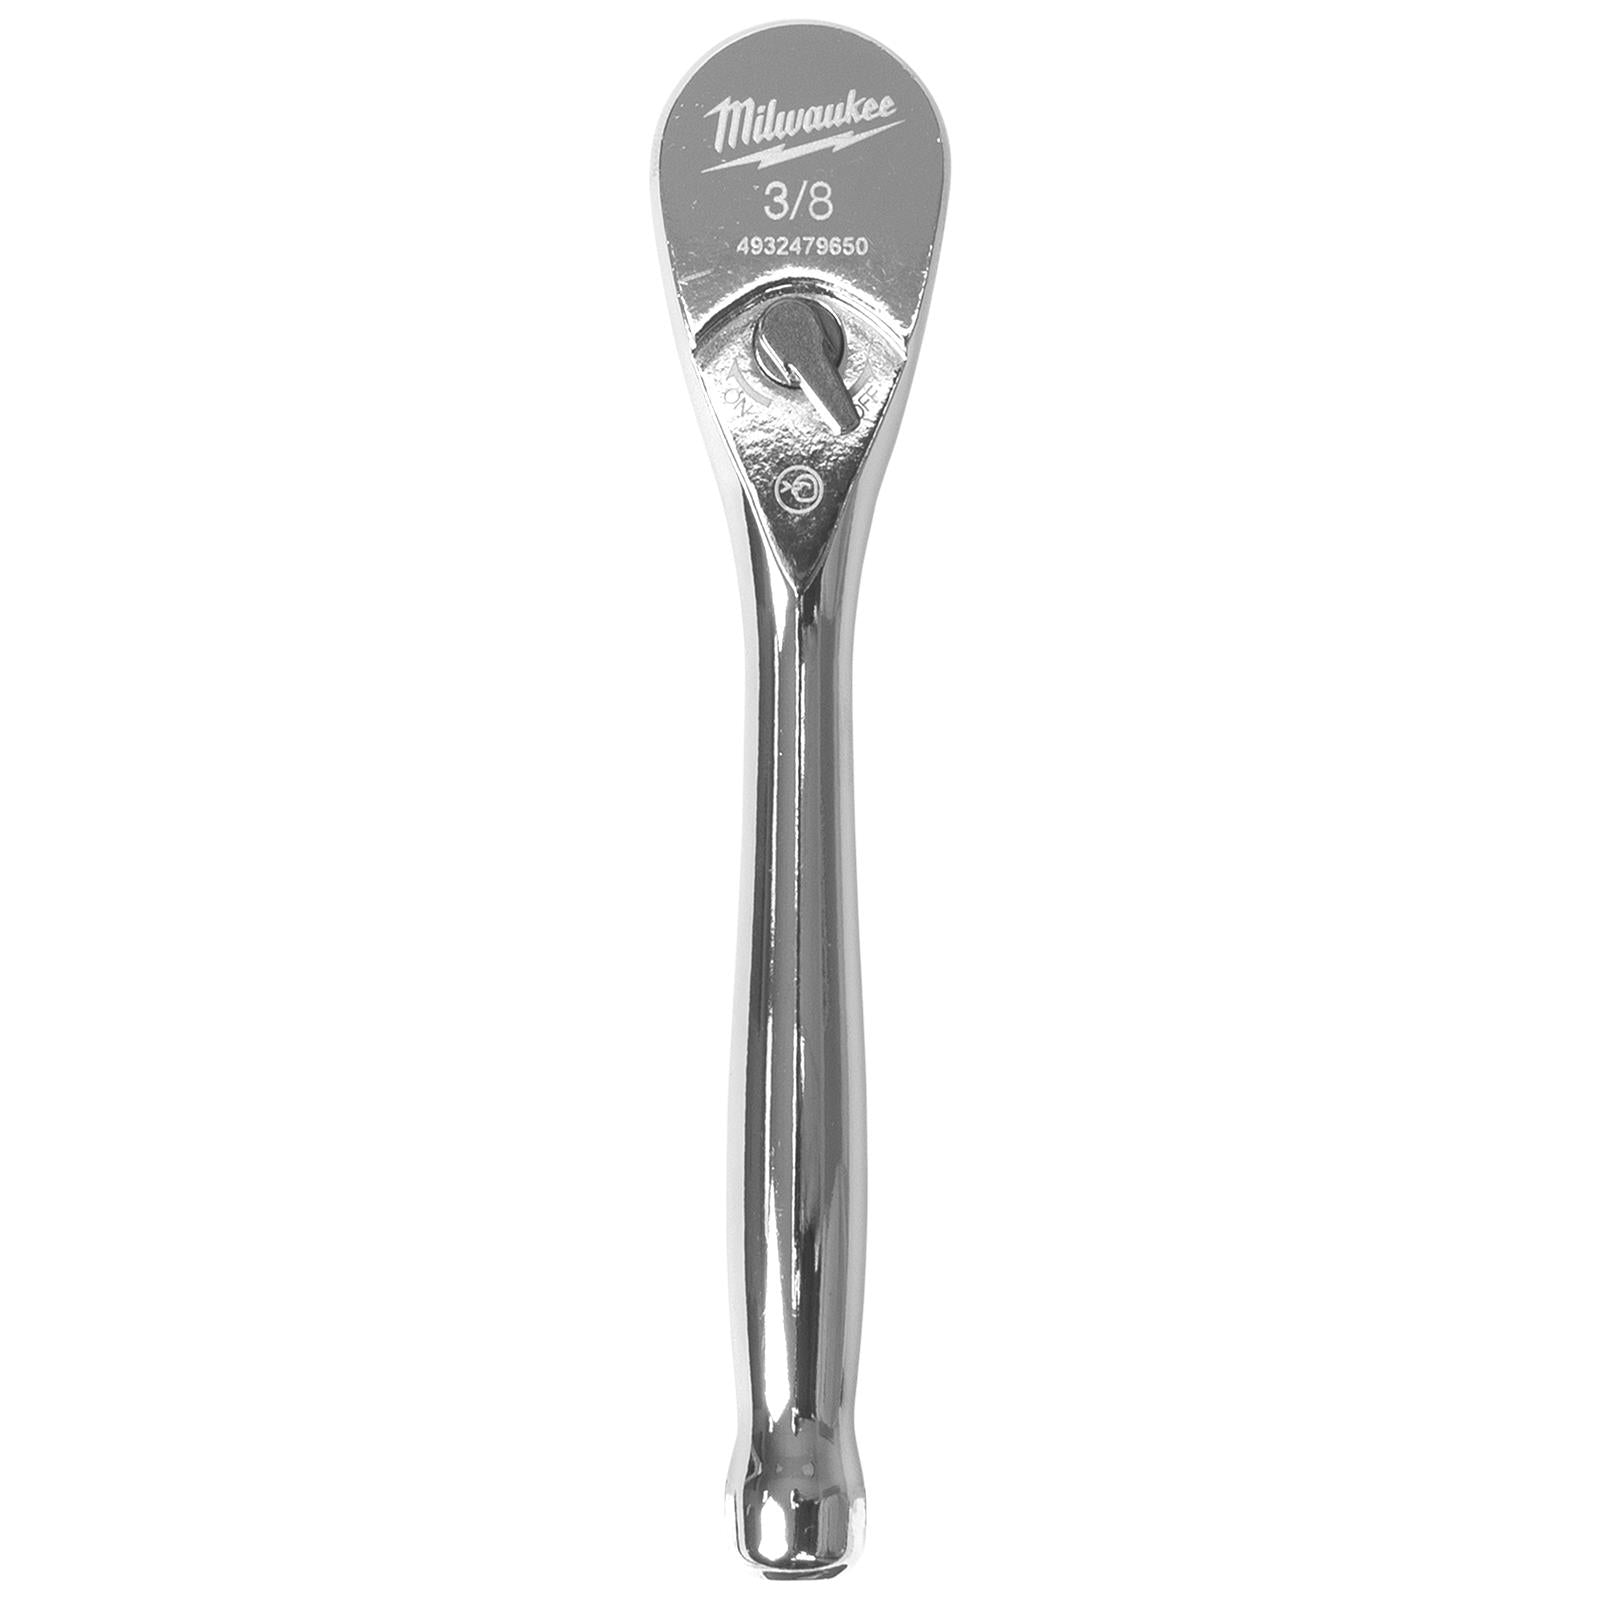 Milwaukee Ratchet Handle Socket Wrench Compact 3/8" Drive 127mm 5 inch 90 Tooth